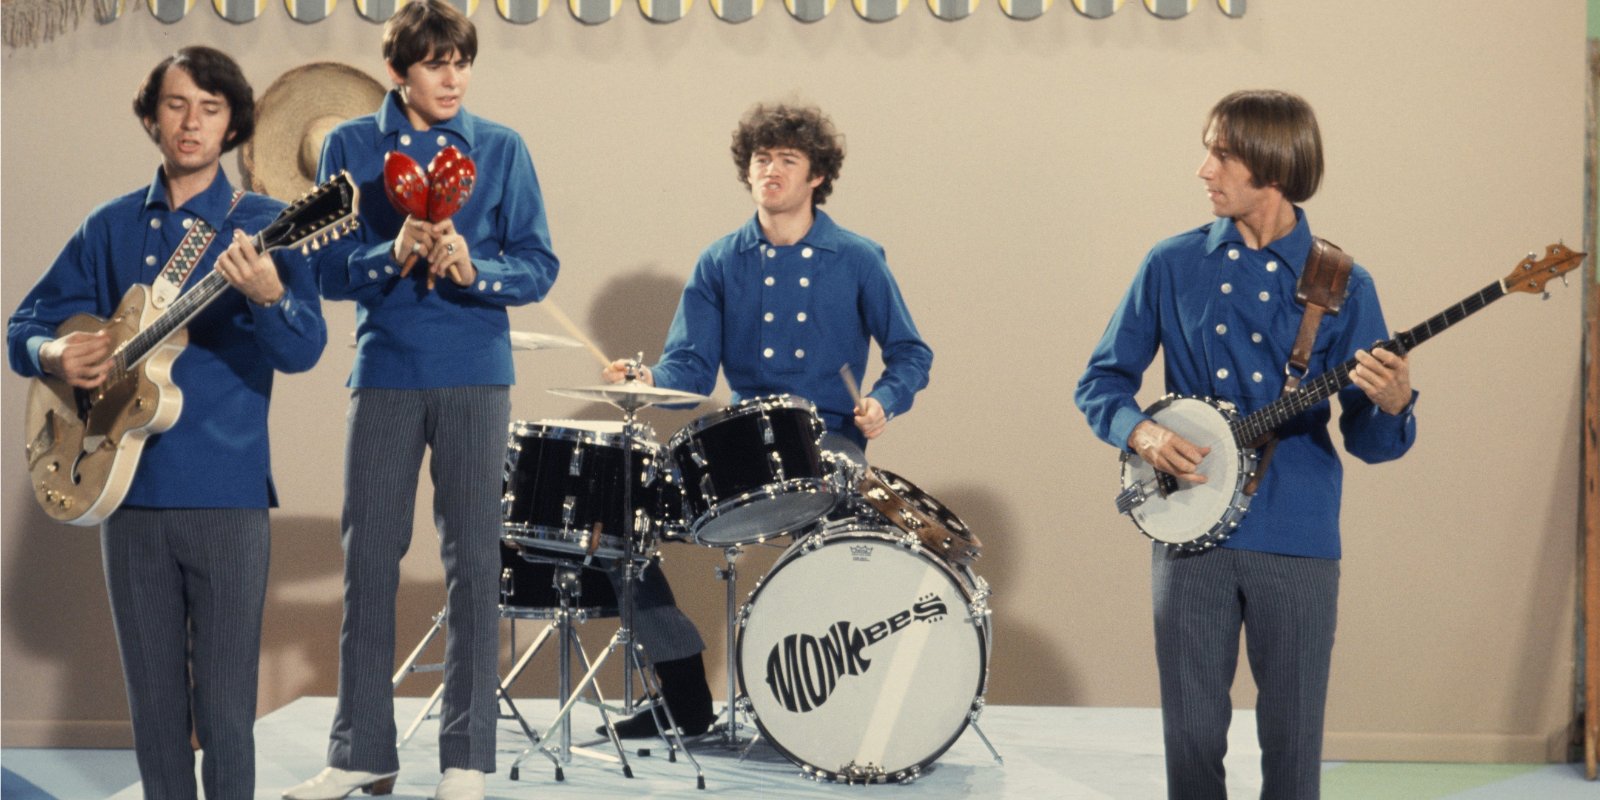 Mike Nesmith, Davy Jones, Micky Dolenz and Peter Tork wearing matching blue shirs and grey pants.